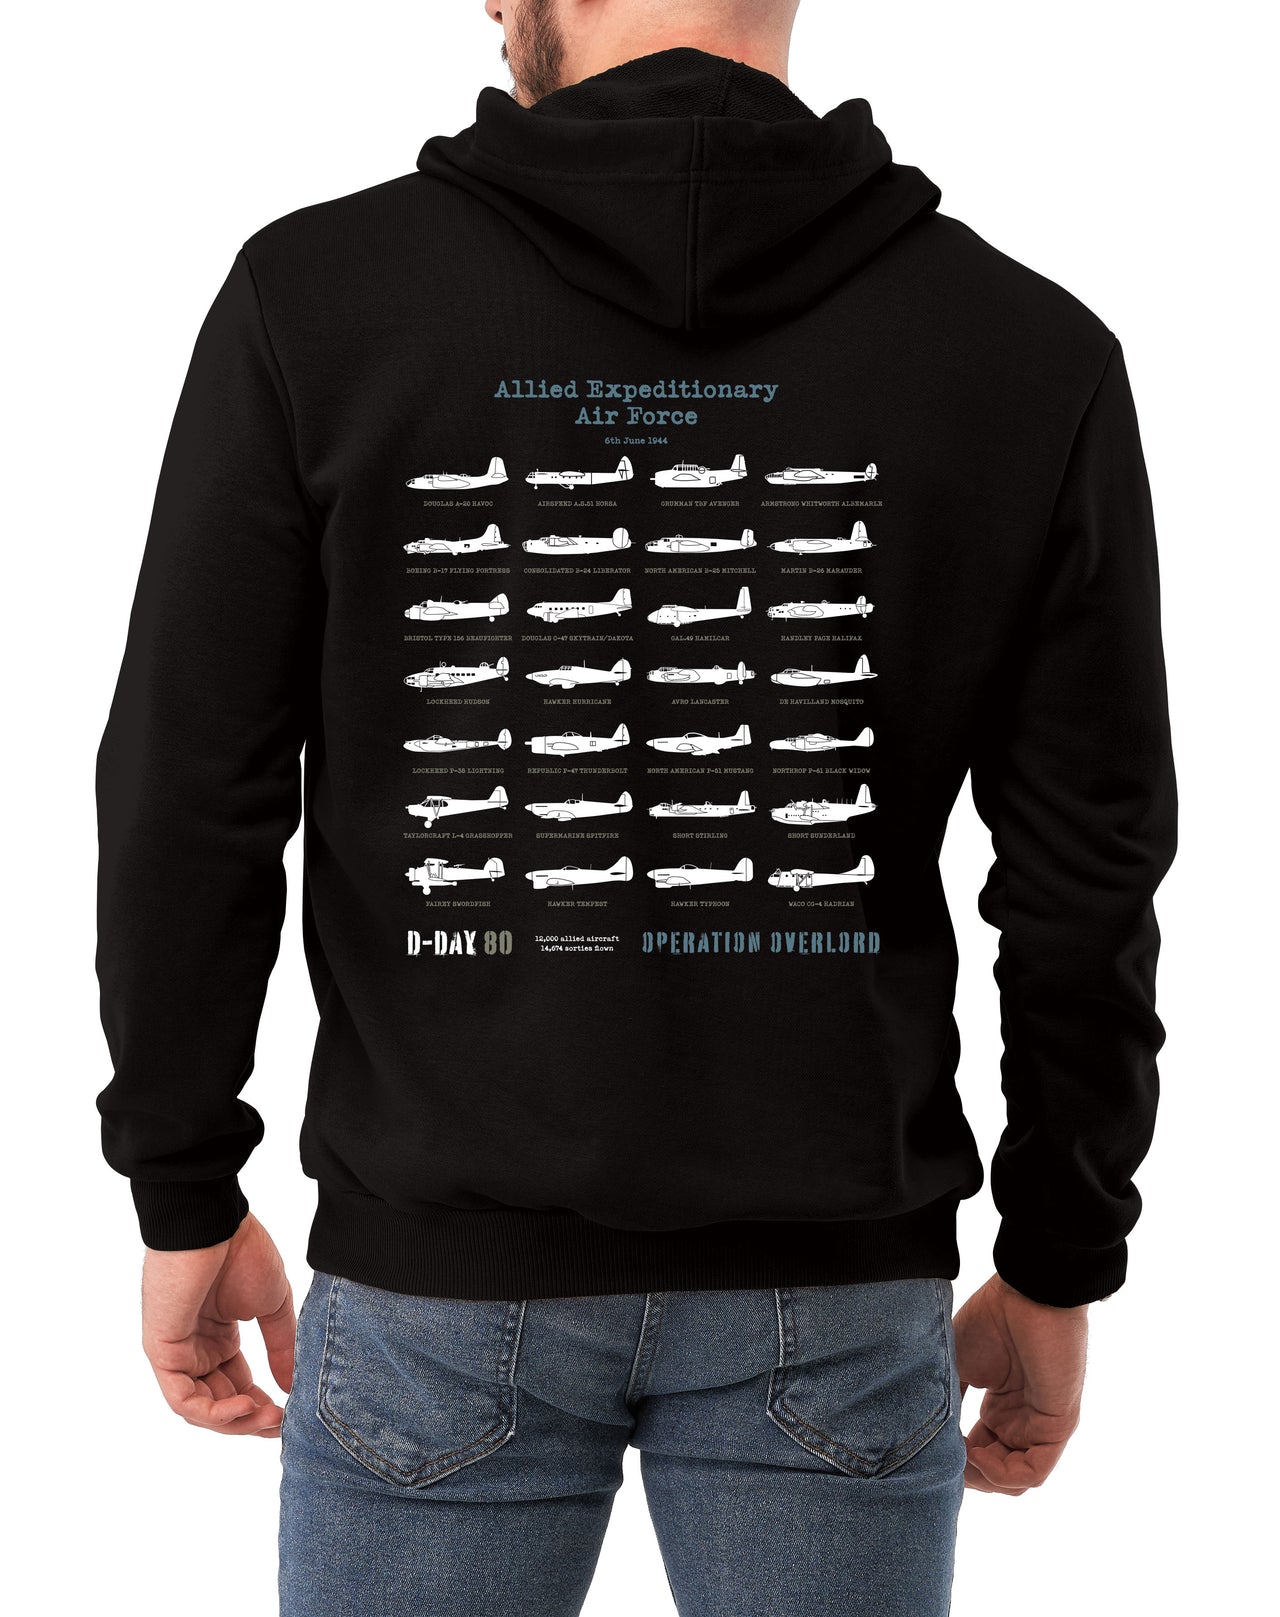 D-Day A-20 Havoc - Hoodie